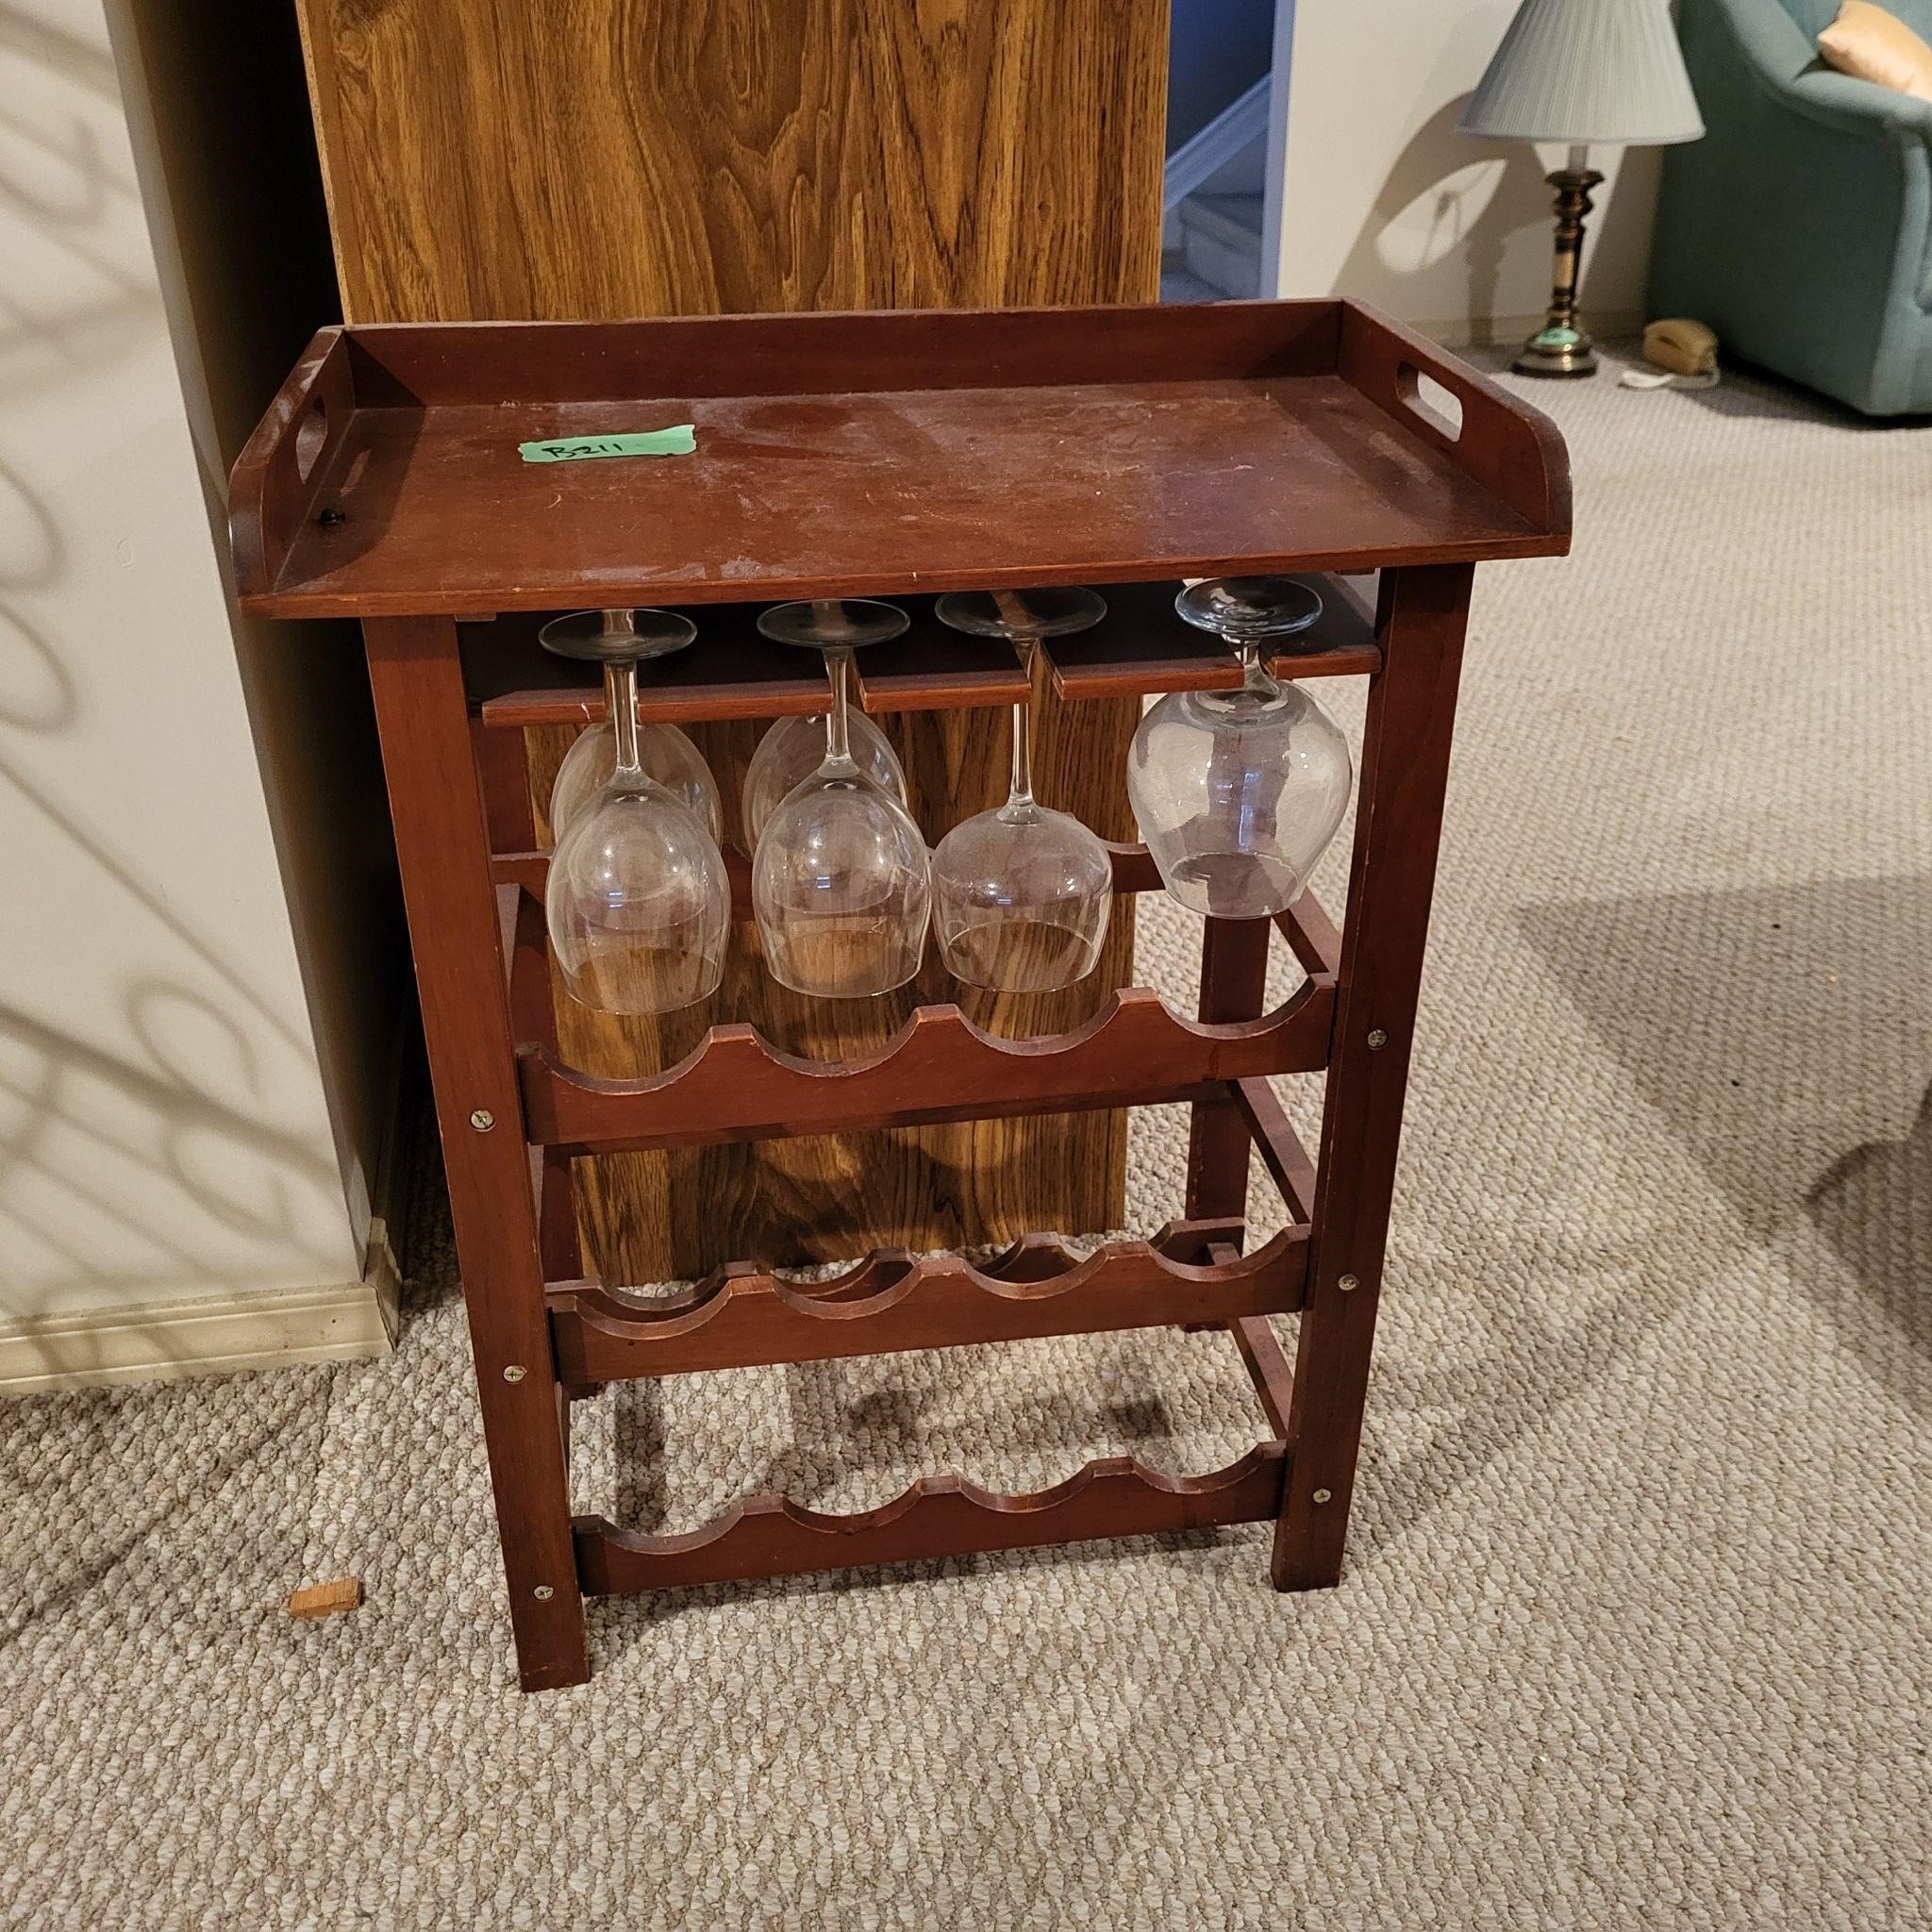 B211 Wine serving table w glasses